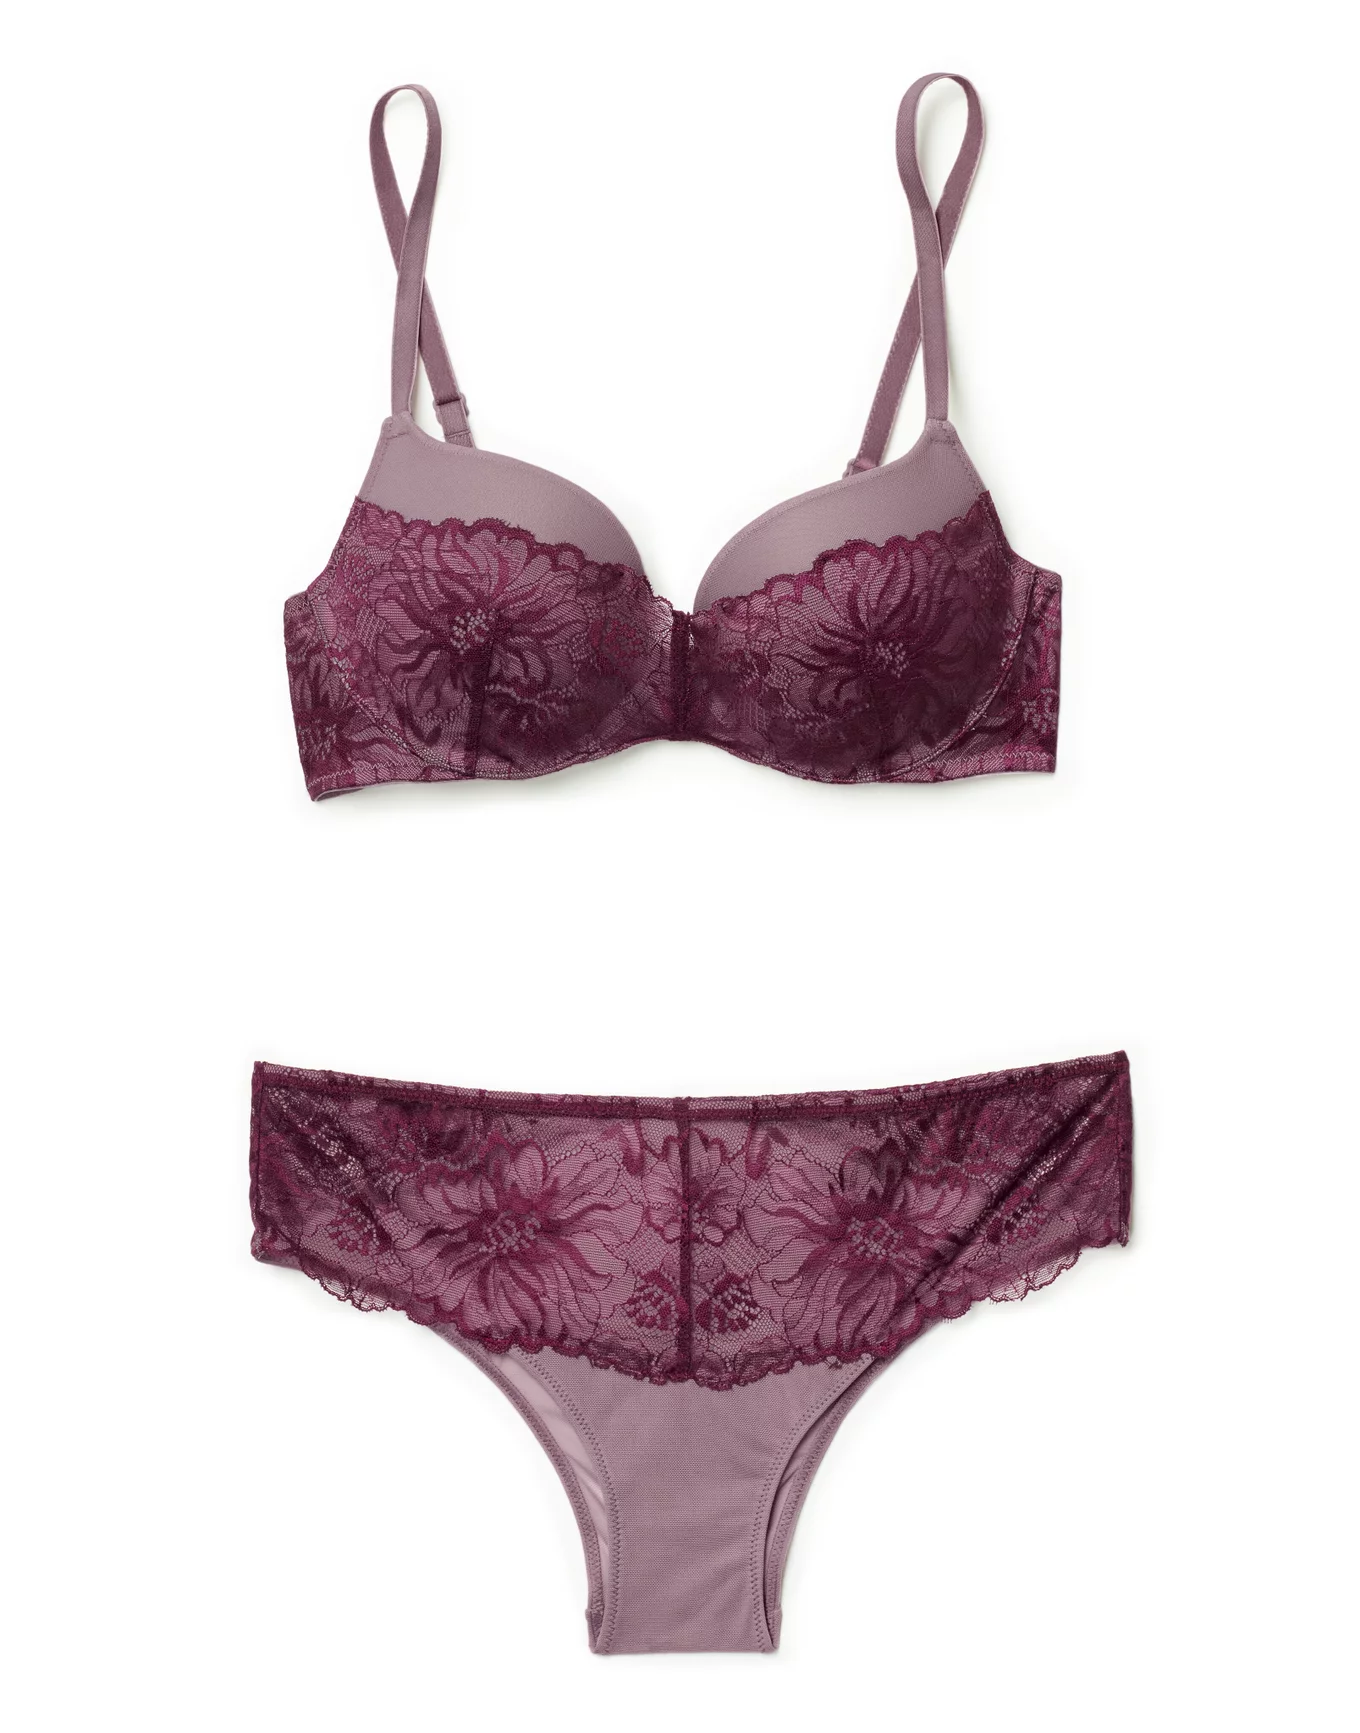 Super Gather Purple Bras Women Underwear Set Cotton Brassiere Thick Push Up  Bra Set Embroidery Lace Lingerie Sets Sexy 211104 From Dou02, $15.12